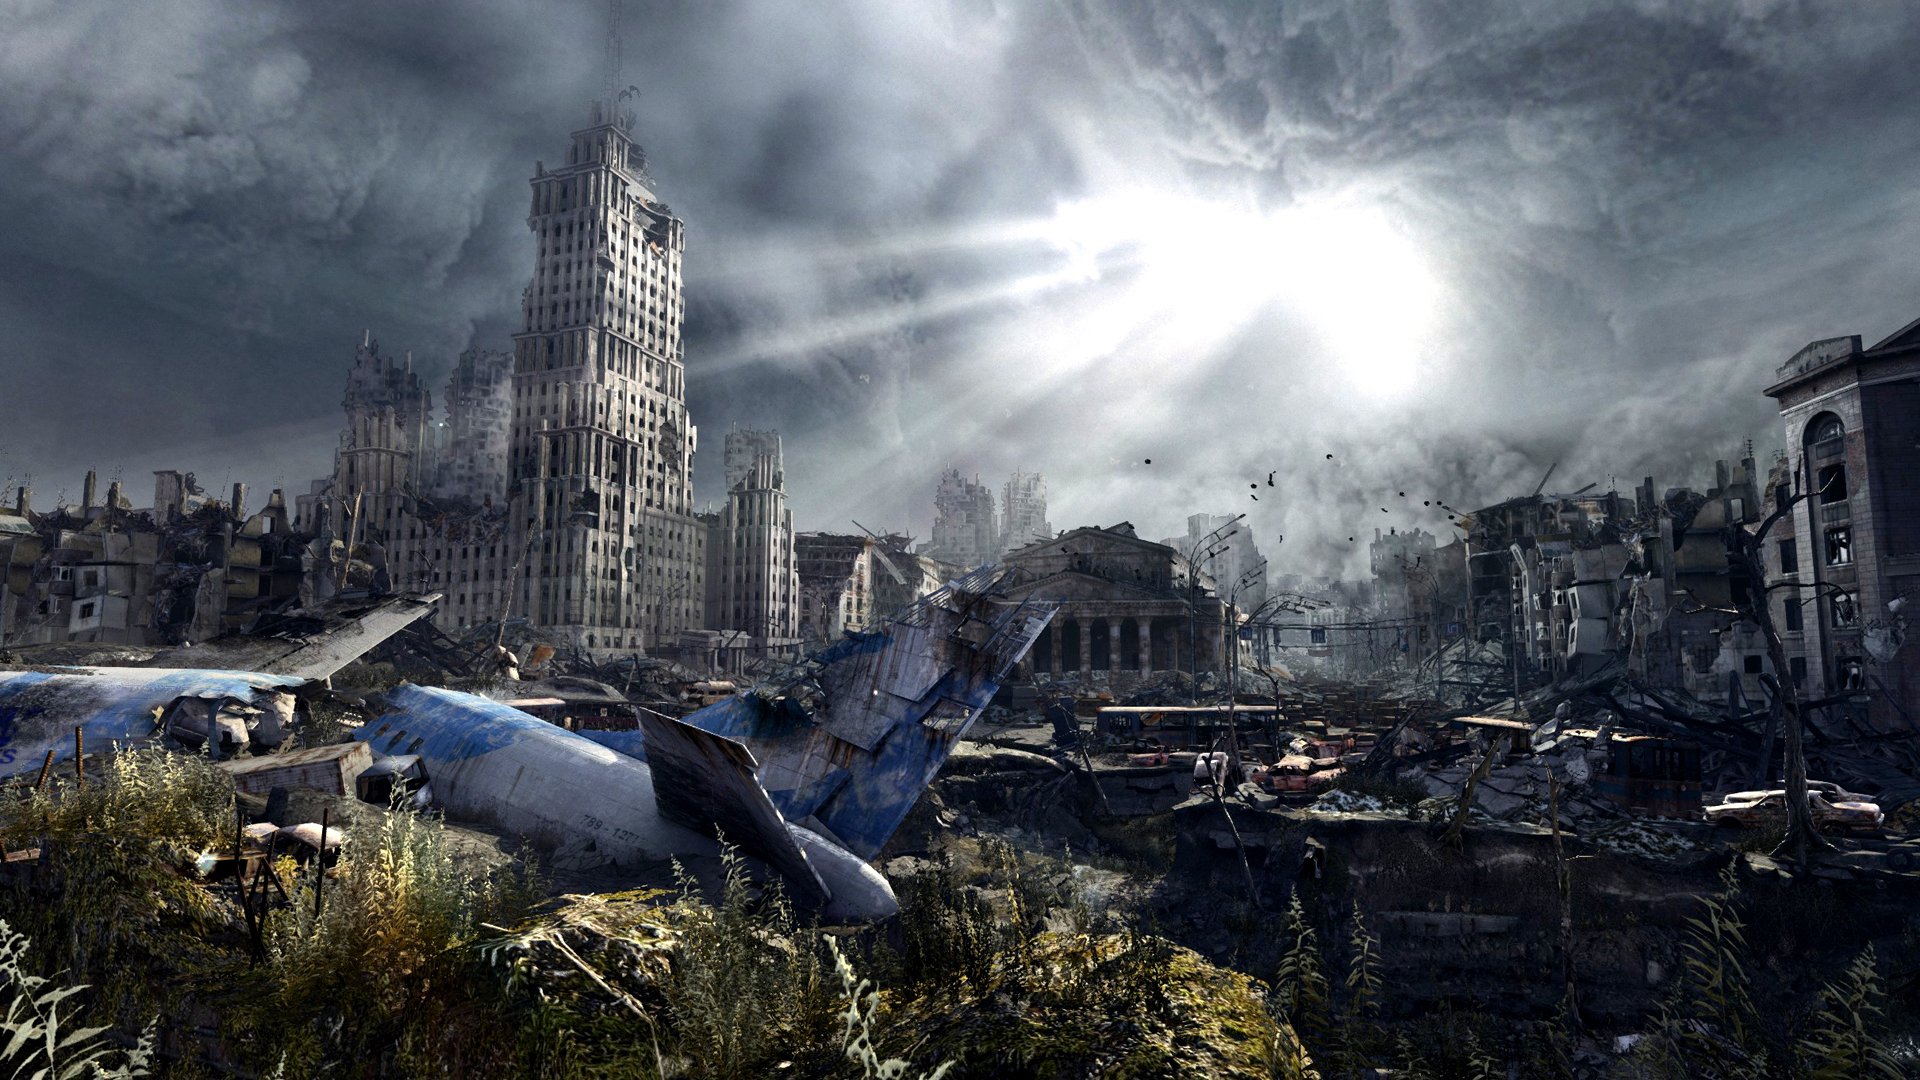 53 Metro Last Light Hd Wallpapers Background Images Wallpaper Images, Photos, Reviews